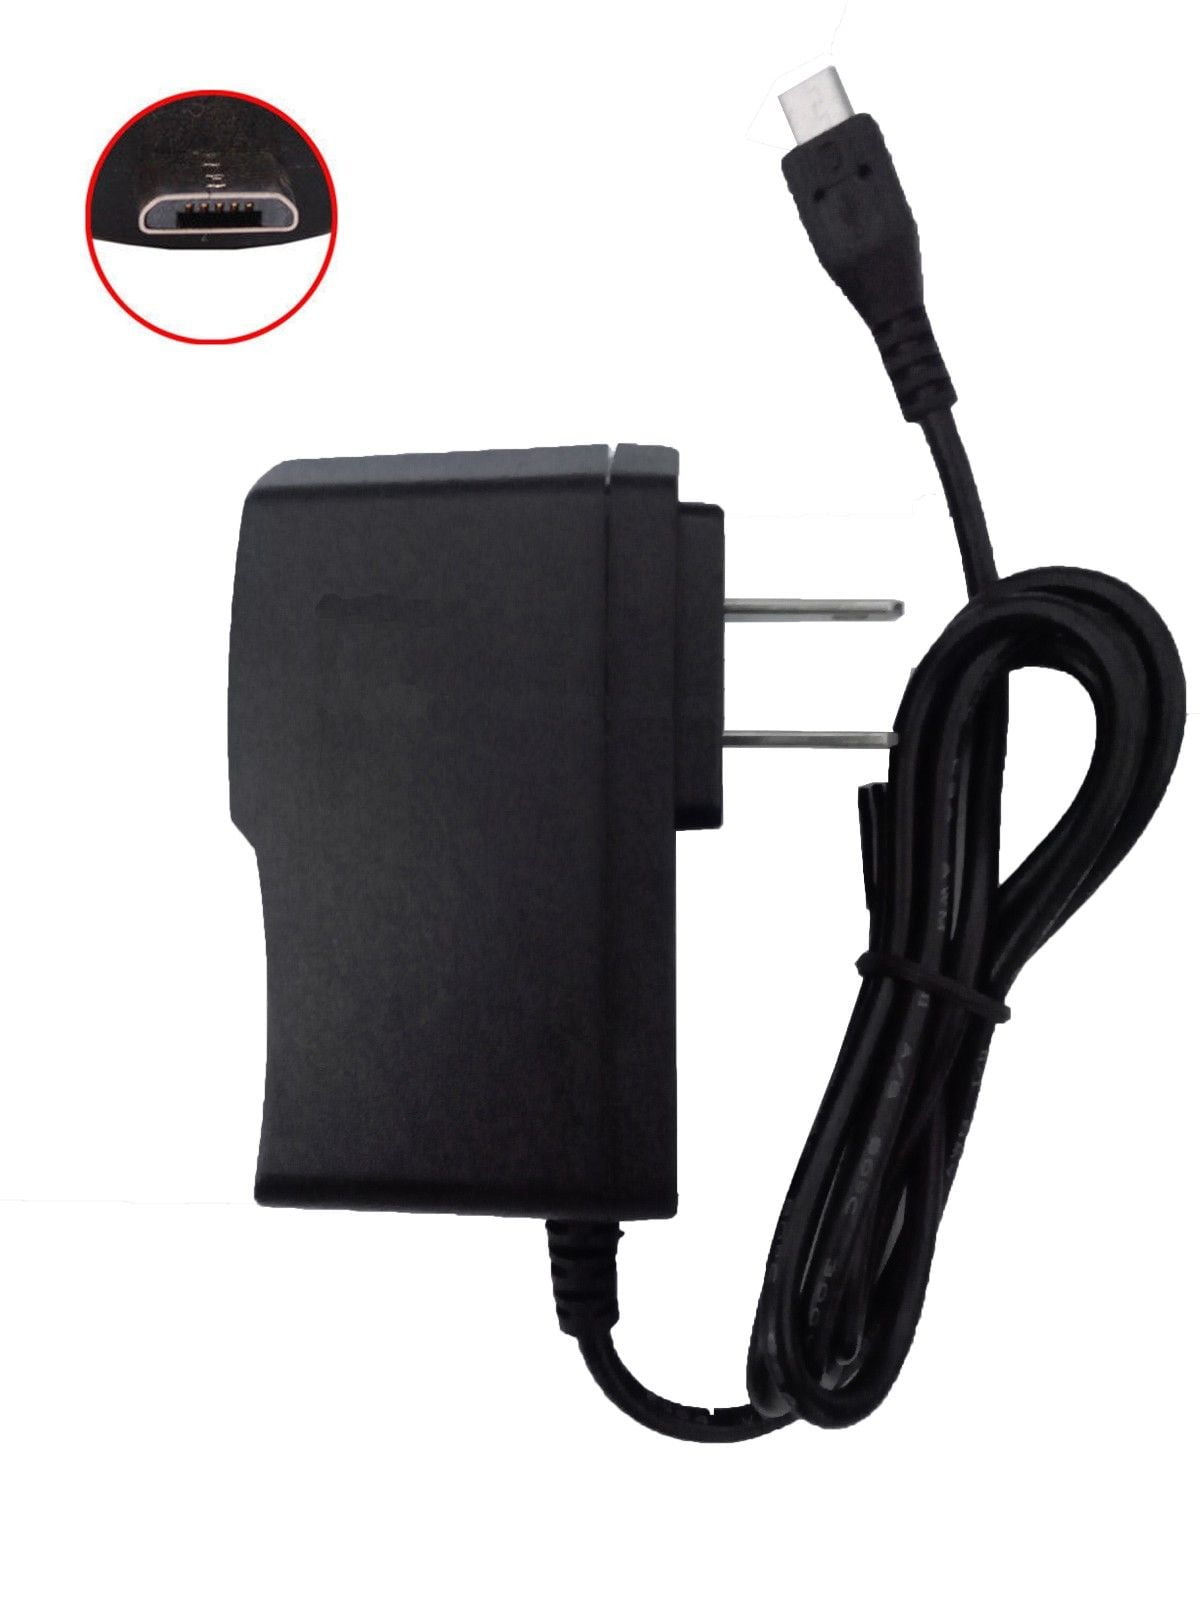 AC Wall Adapter Power Supply Charger Plug For Amazon Kindle Fire Kids 7" tablet 